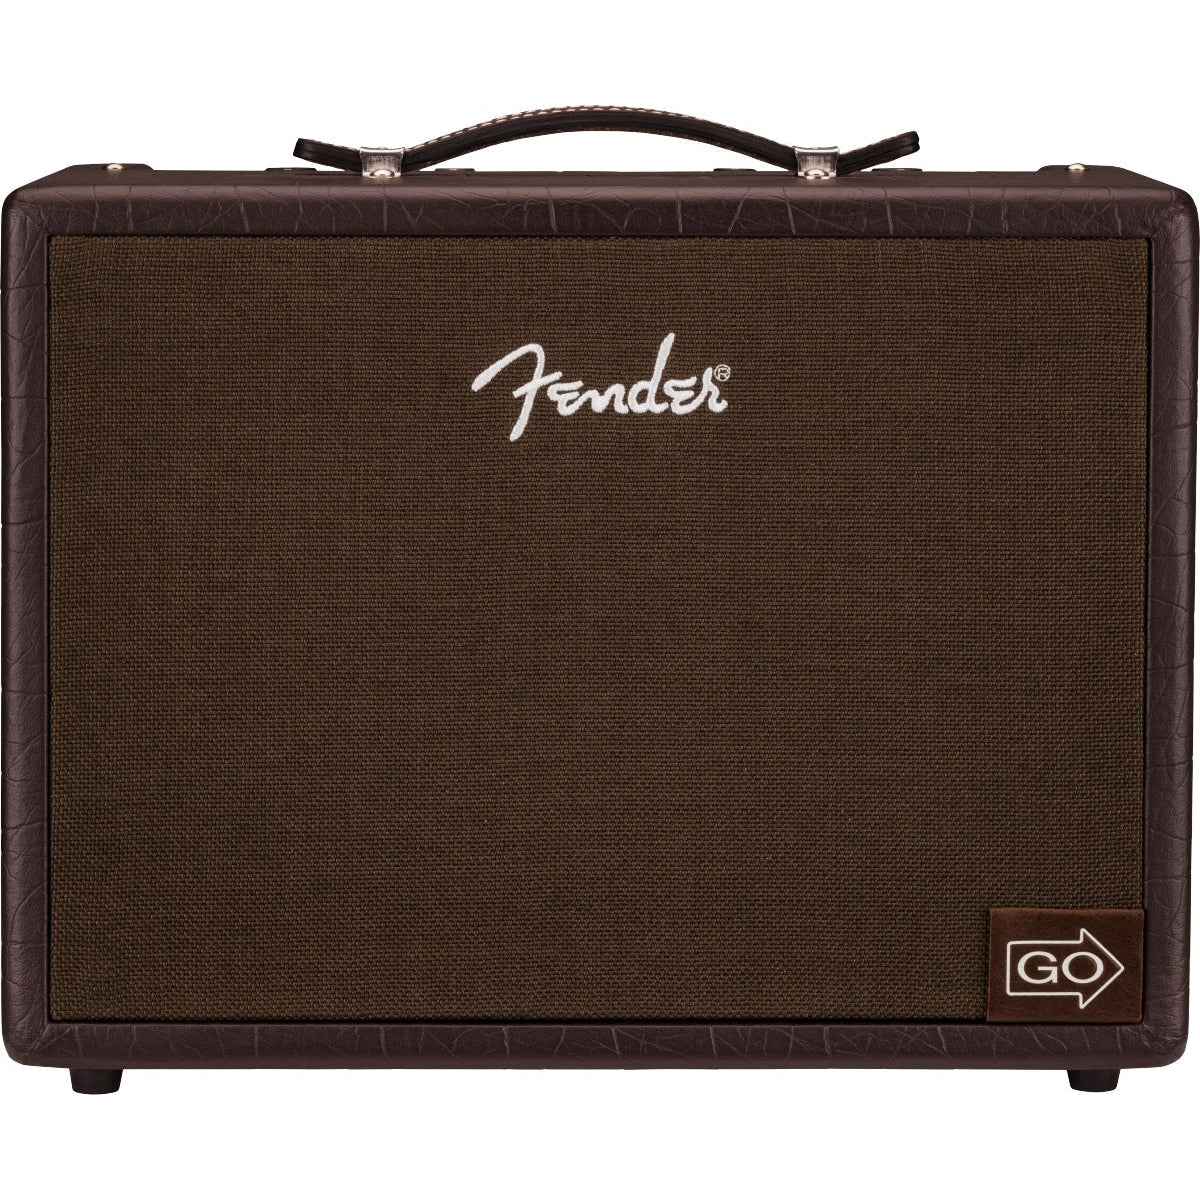 Fender Acoustic Junior GO Acoustic Guitar Amp with Bluetooth & 8" Speaker-100 Watts-Music World Academy